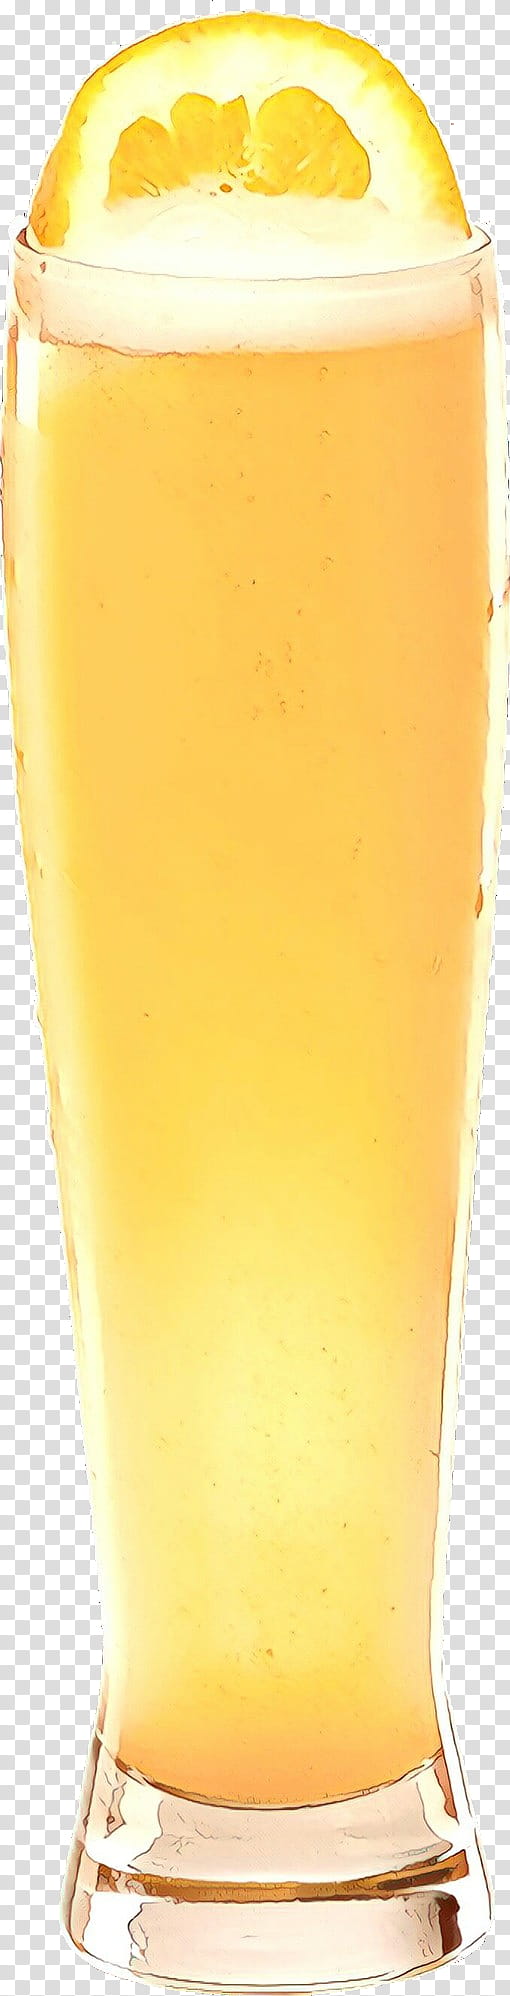 drink yellow juice pint glass beer glass, Cartoon, Alcoholic Beverage, Bellini, Champagne Cocktail, Fizz transparent background PNG clipart